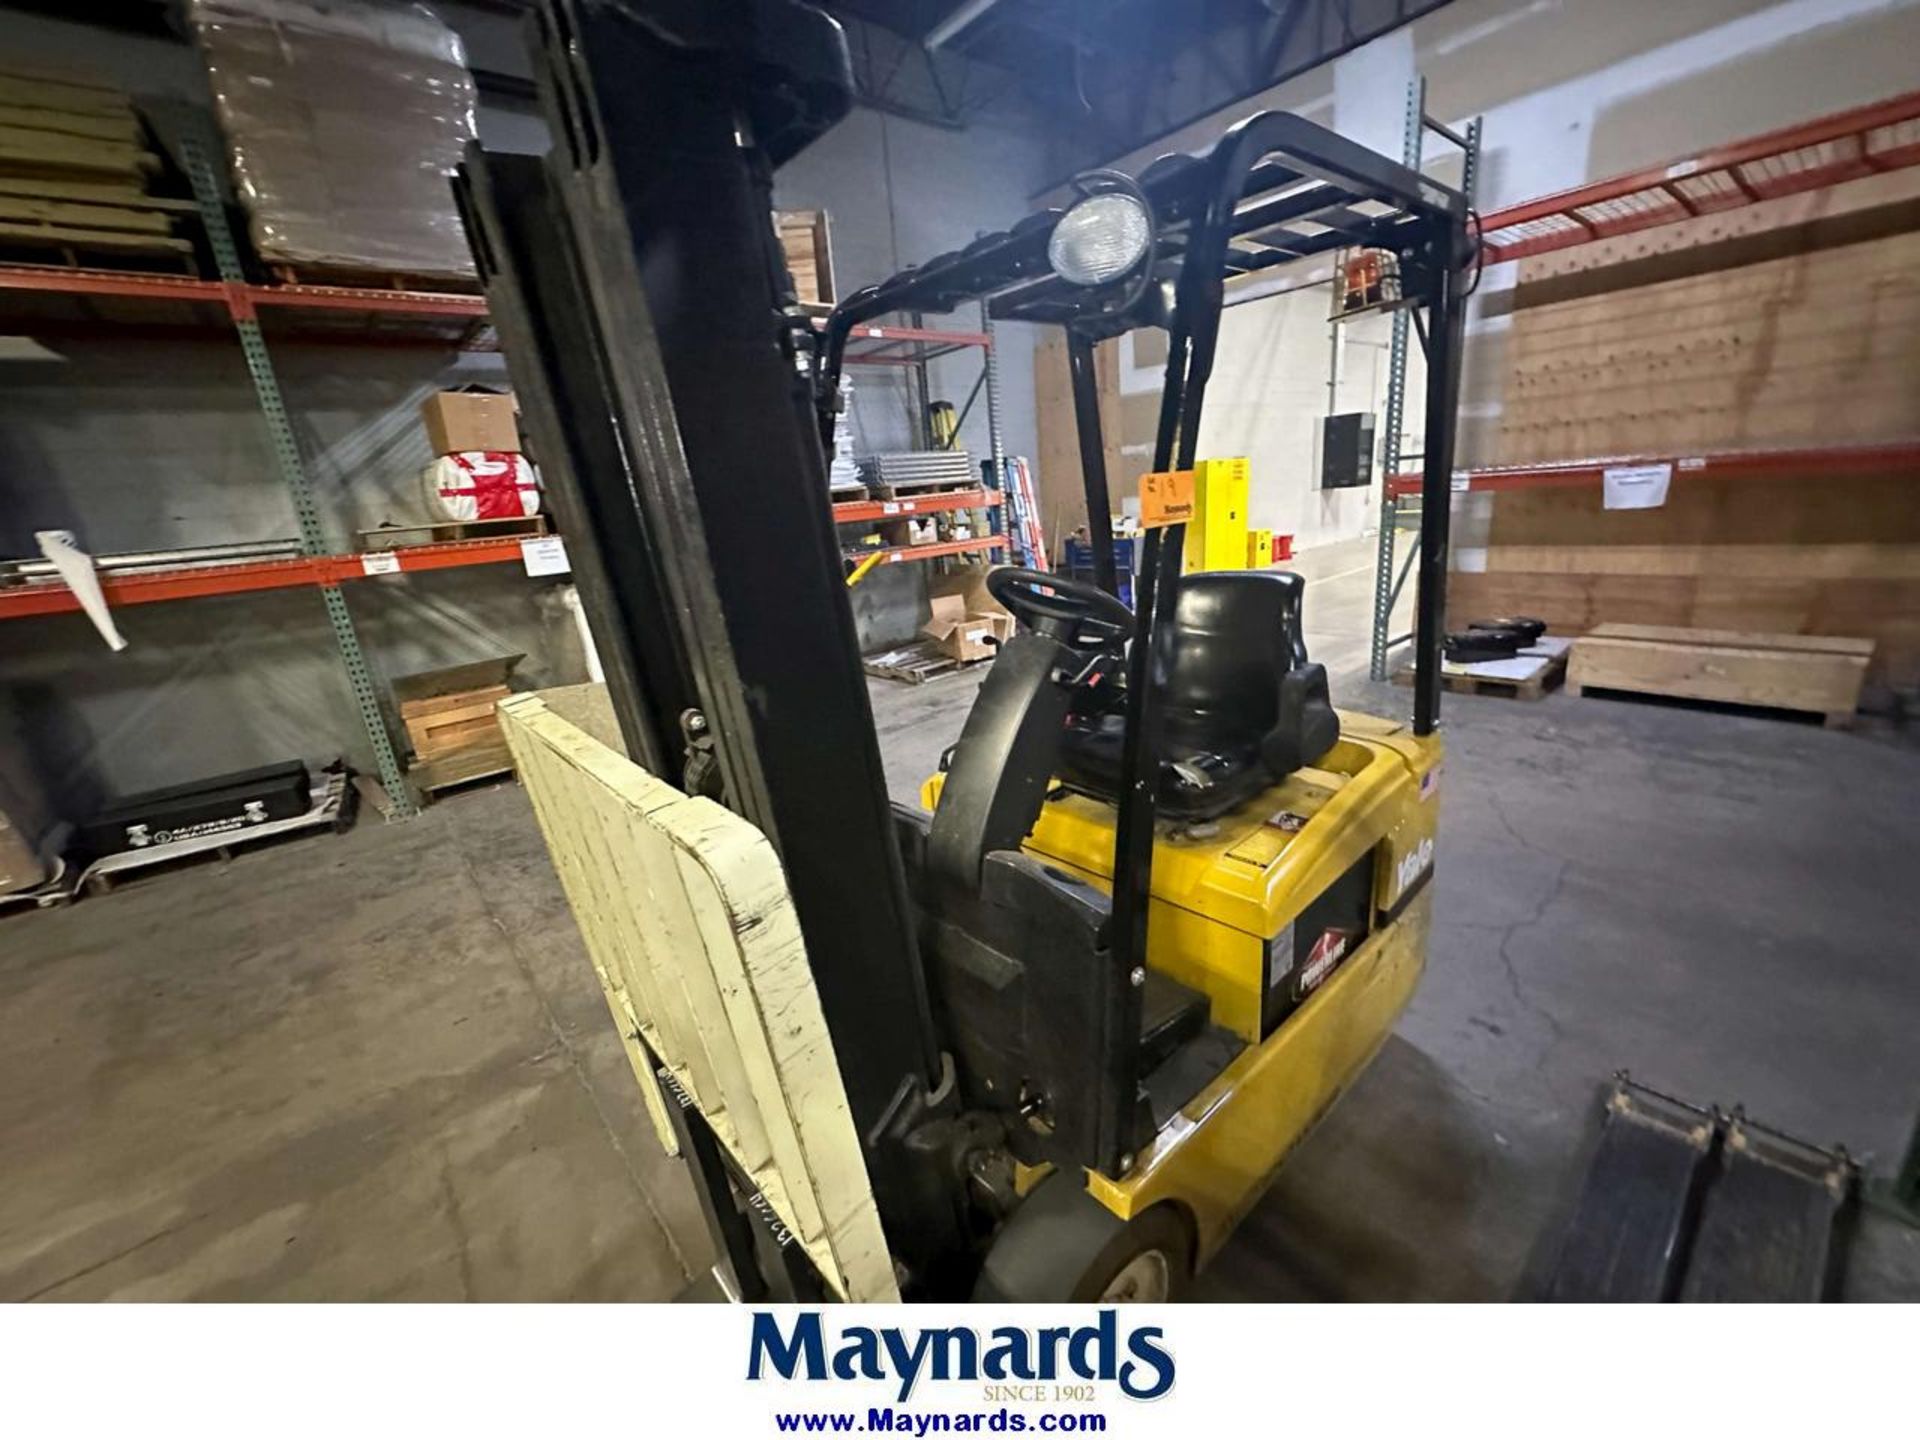 2008 Yale 2,850 Lb. Cap. 3-Wheel Electric Forklift (Late Delivery) - Image 10 of 19